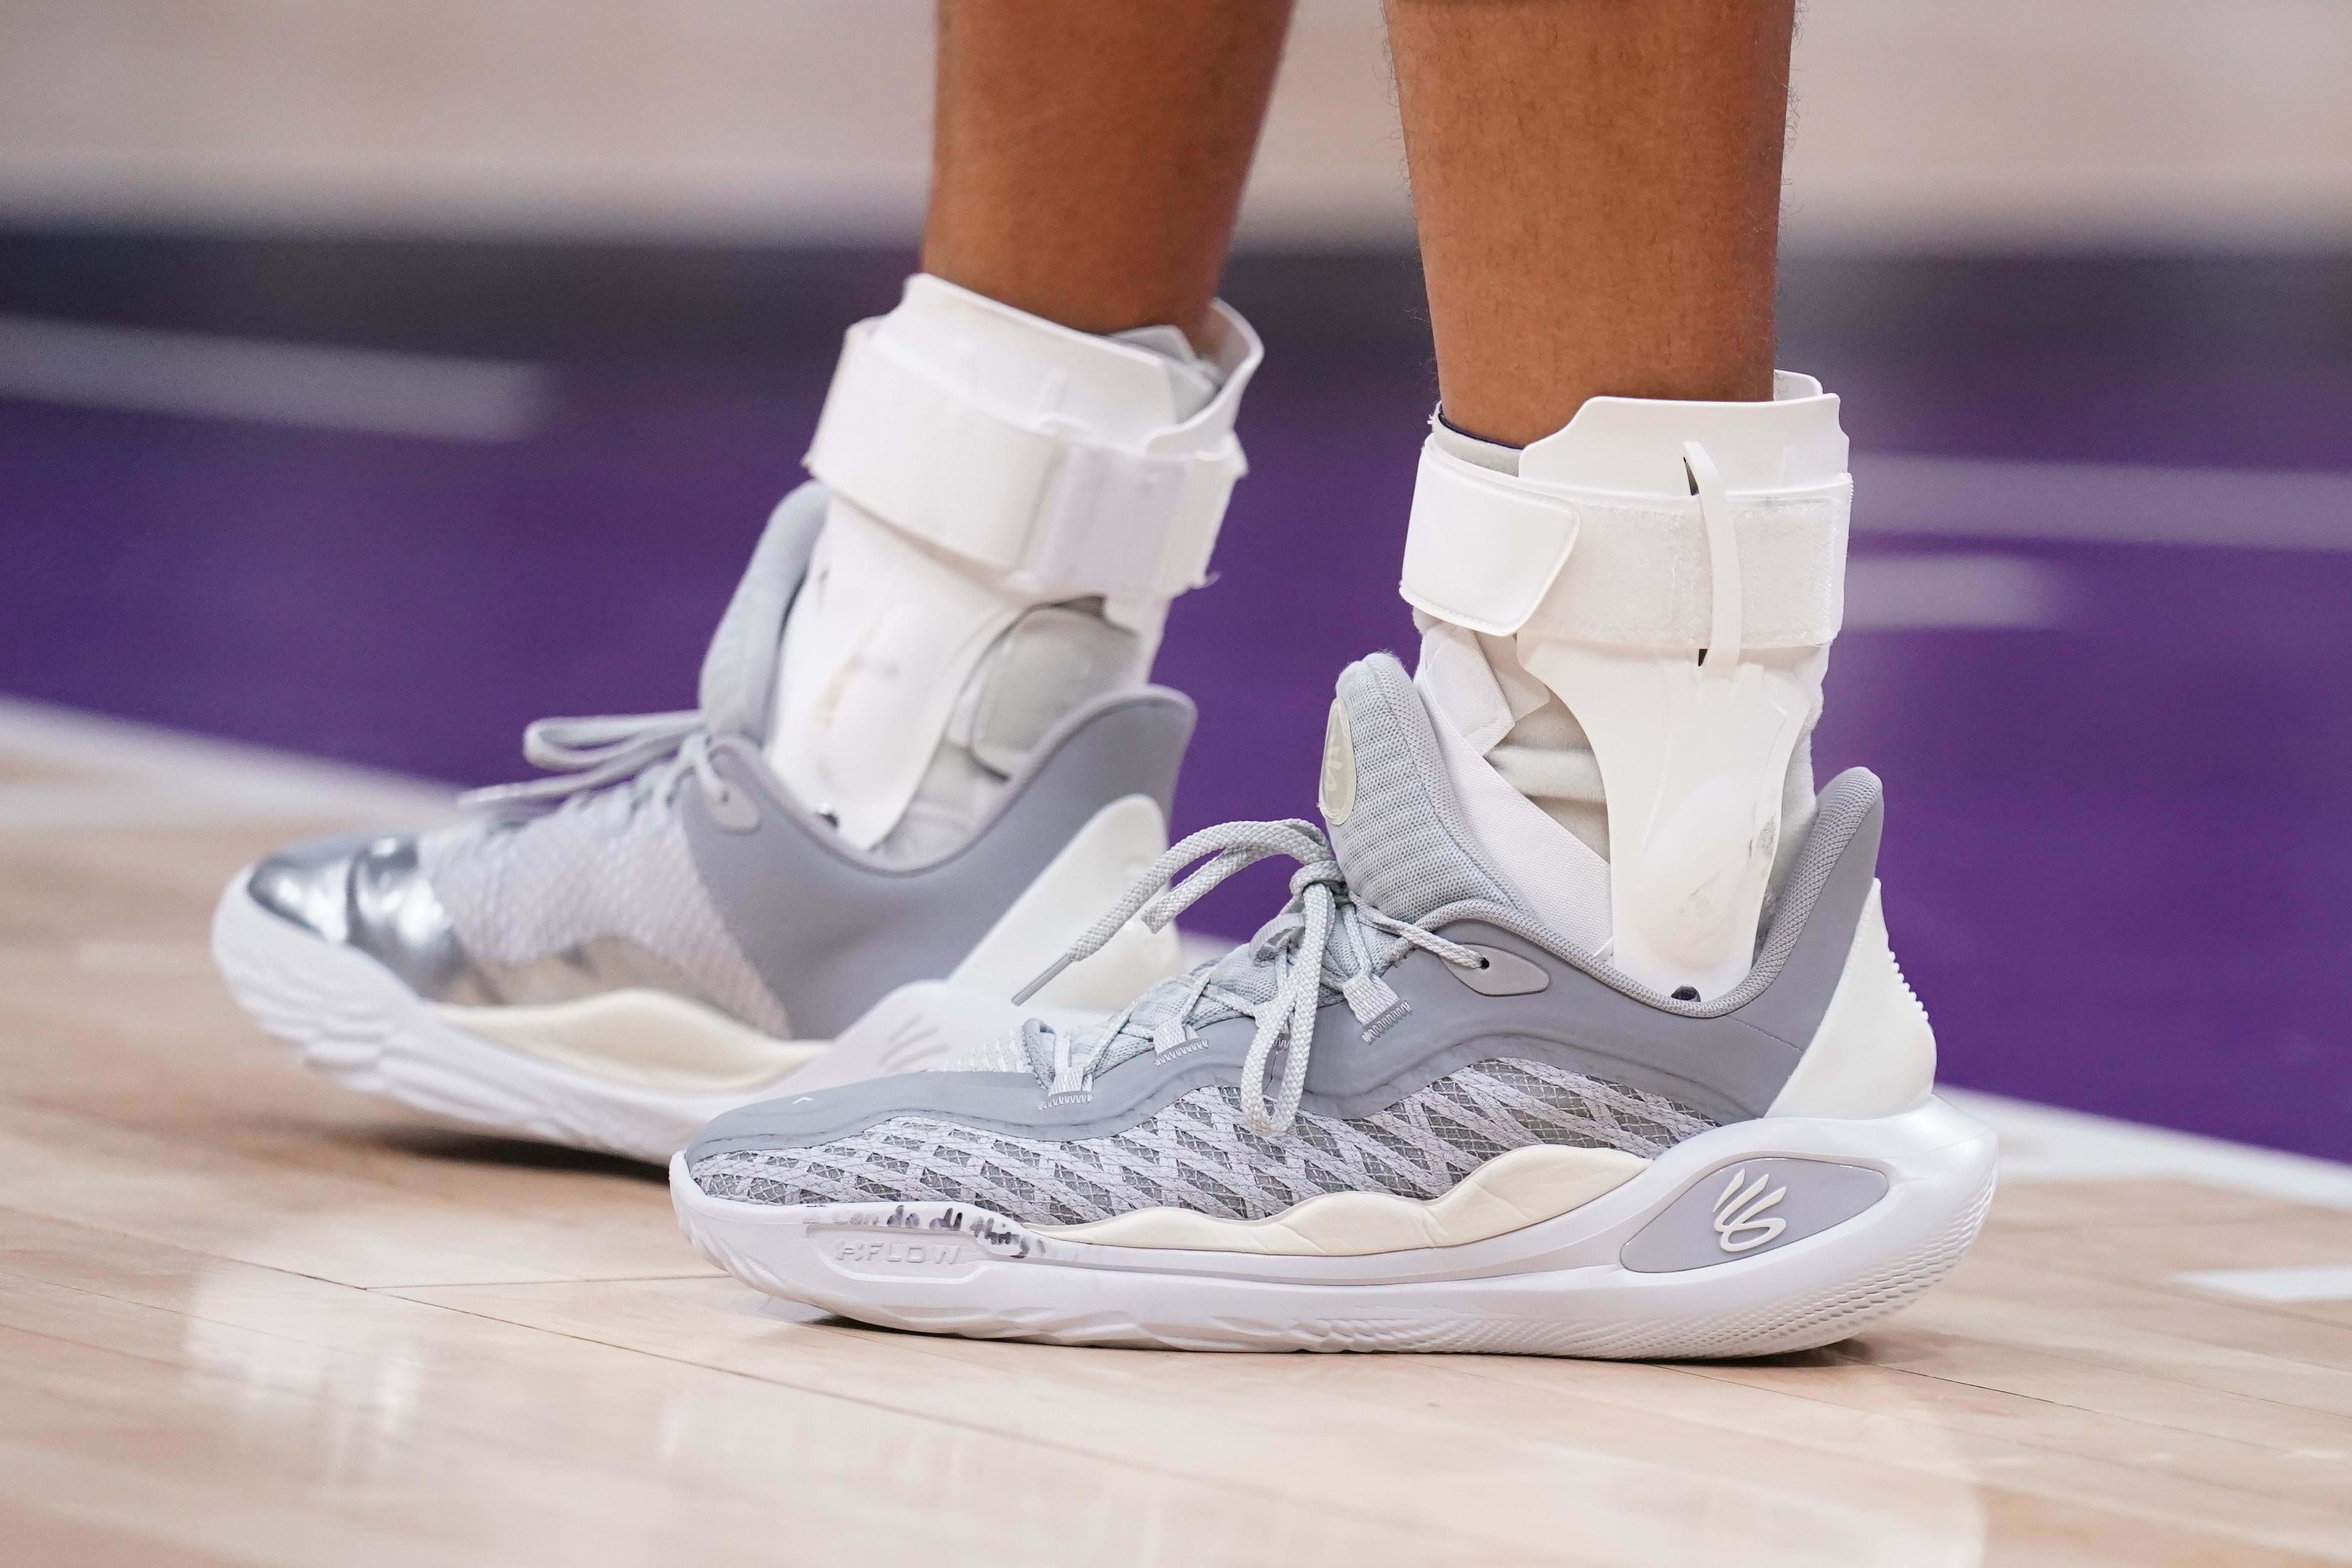 Golden State Warriors guard Stephen Curry's grey and white sneakers.